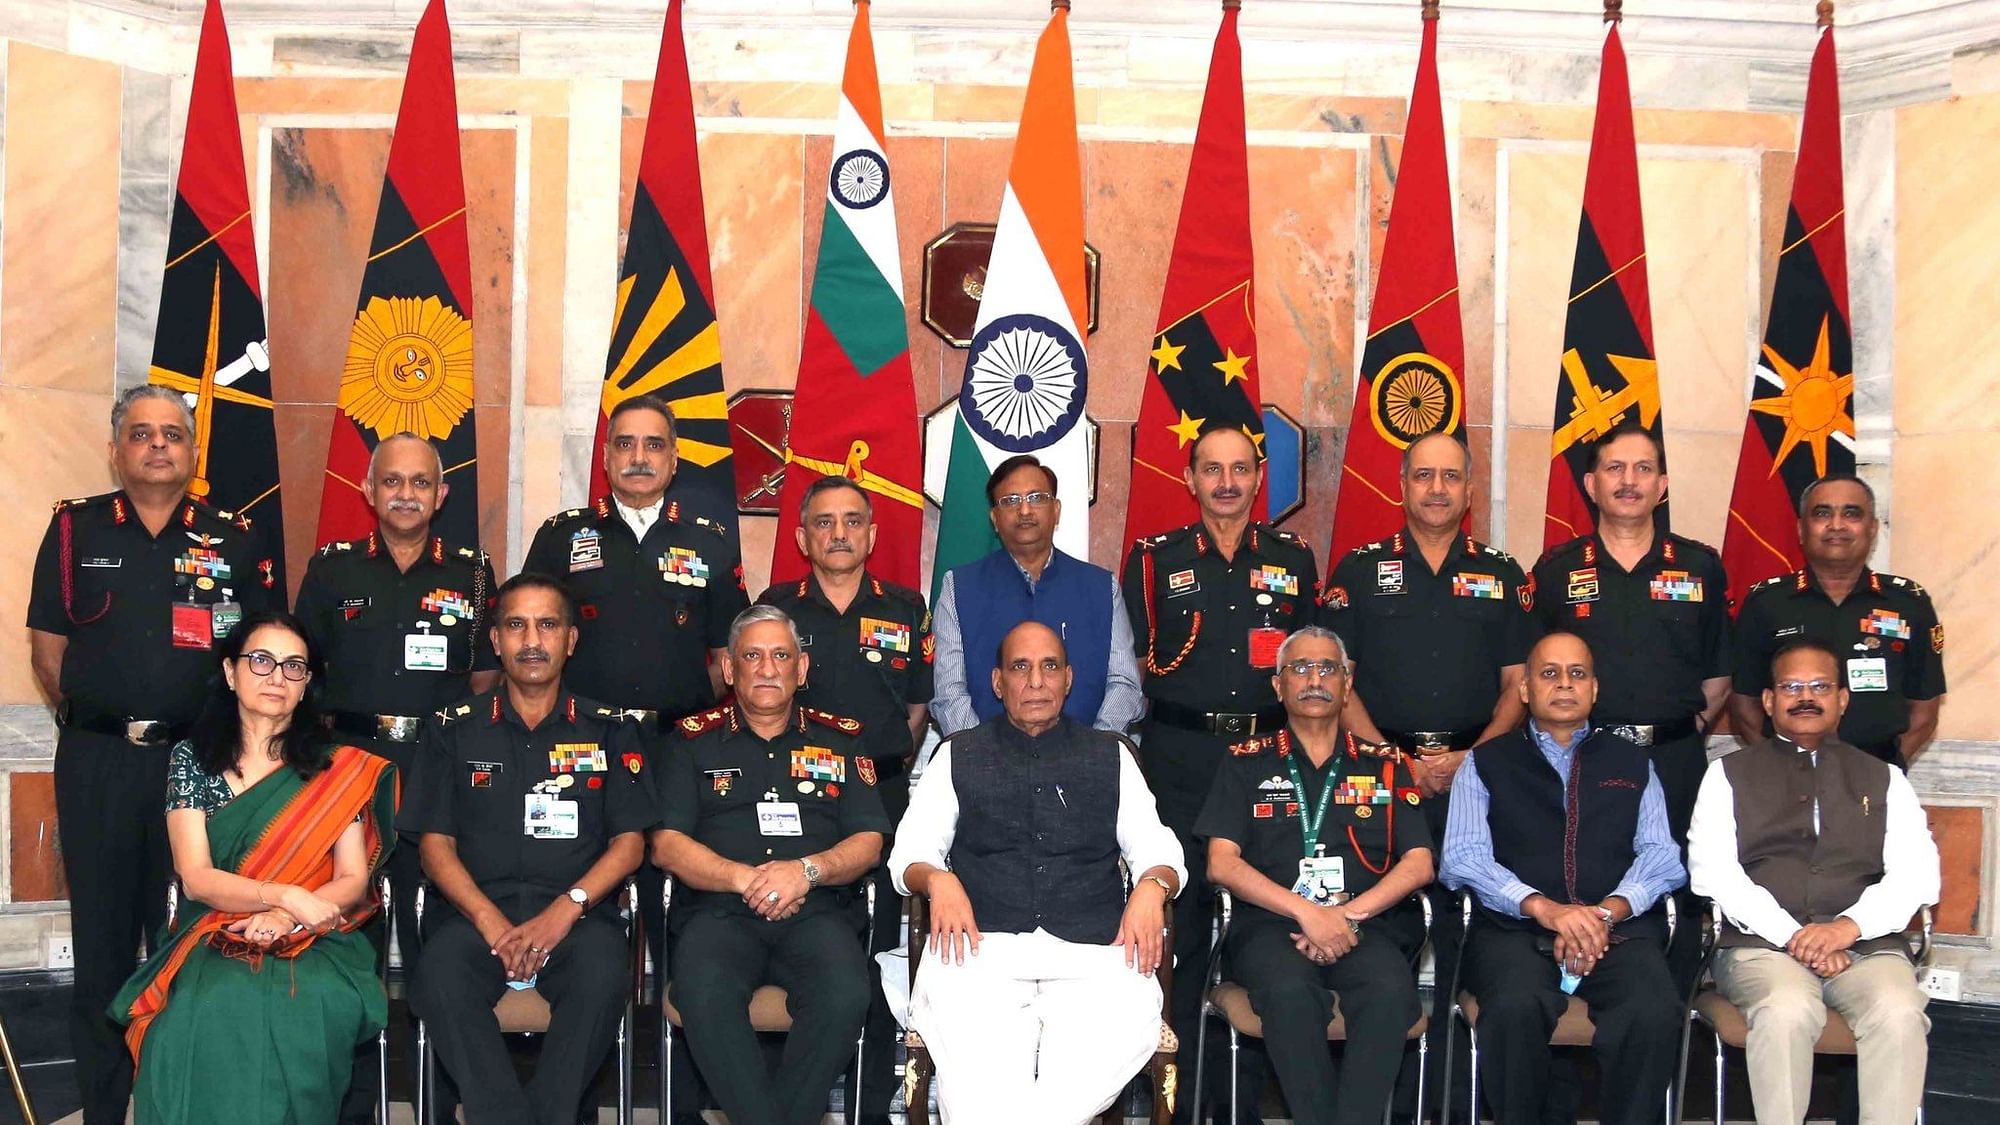 Defence Minister Rajnath Singh on Wednesday, 28 October cautioned Army commanders to be wary of Chinese actions at disputed borders and their intent during military talks.